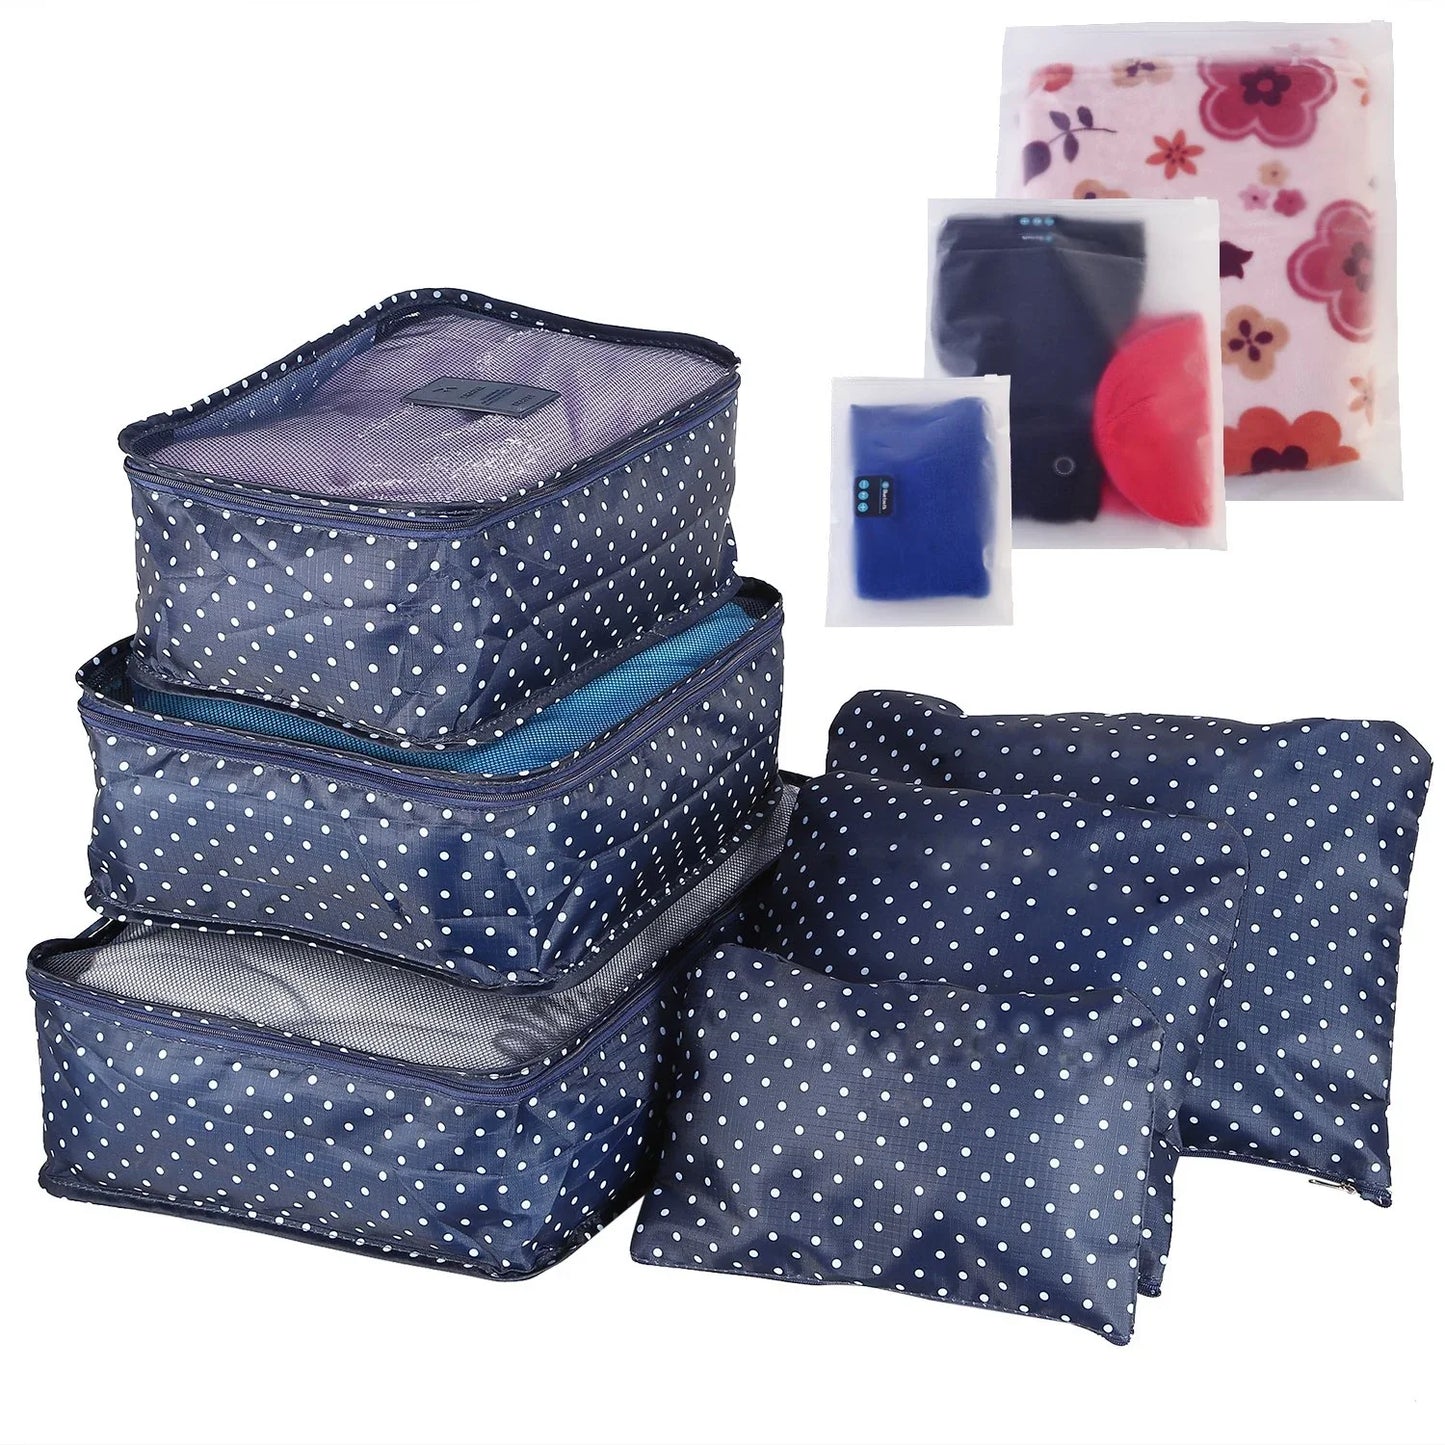 Clothes Storage Travel Bags Organizer for Luggage Packing Bags for Suitcases - Packing Cubes for Carry on Suitcase - 9 Pieces